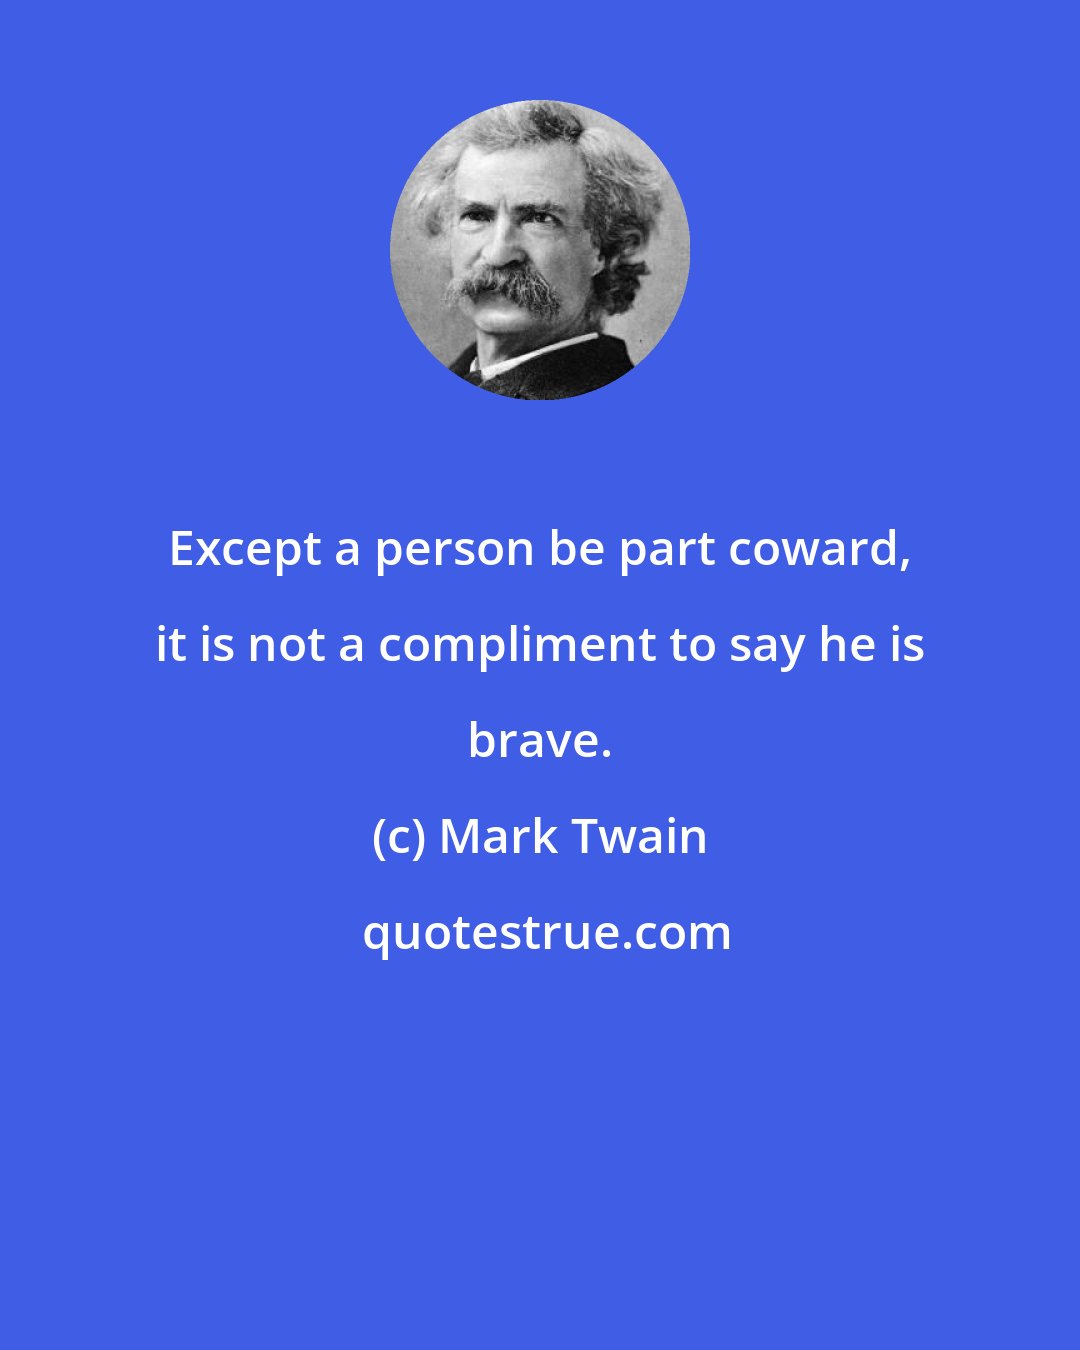 Mark Twain: Except a person be part coward, it is not a compliment to say he is brave.